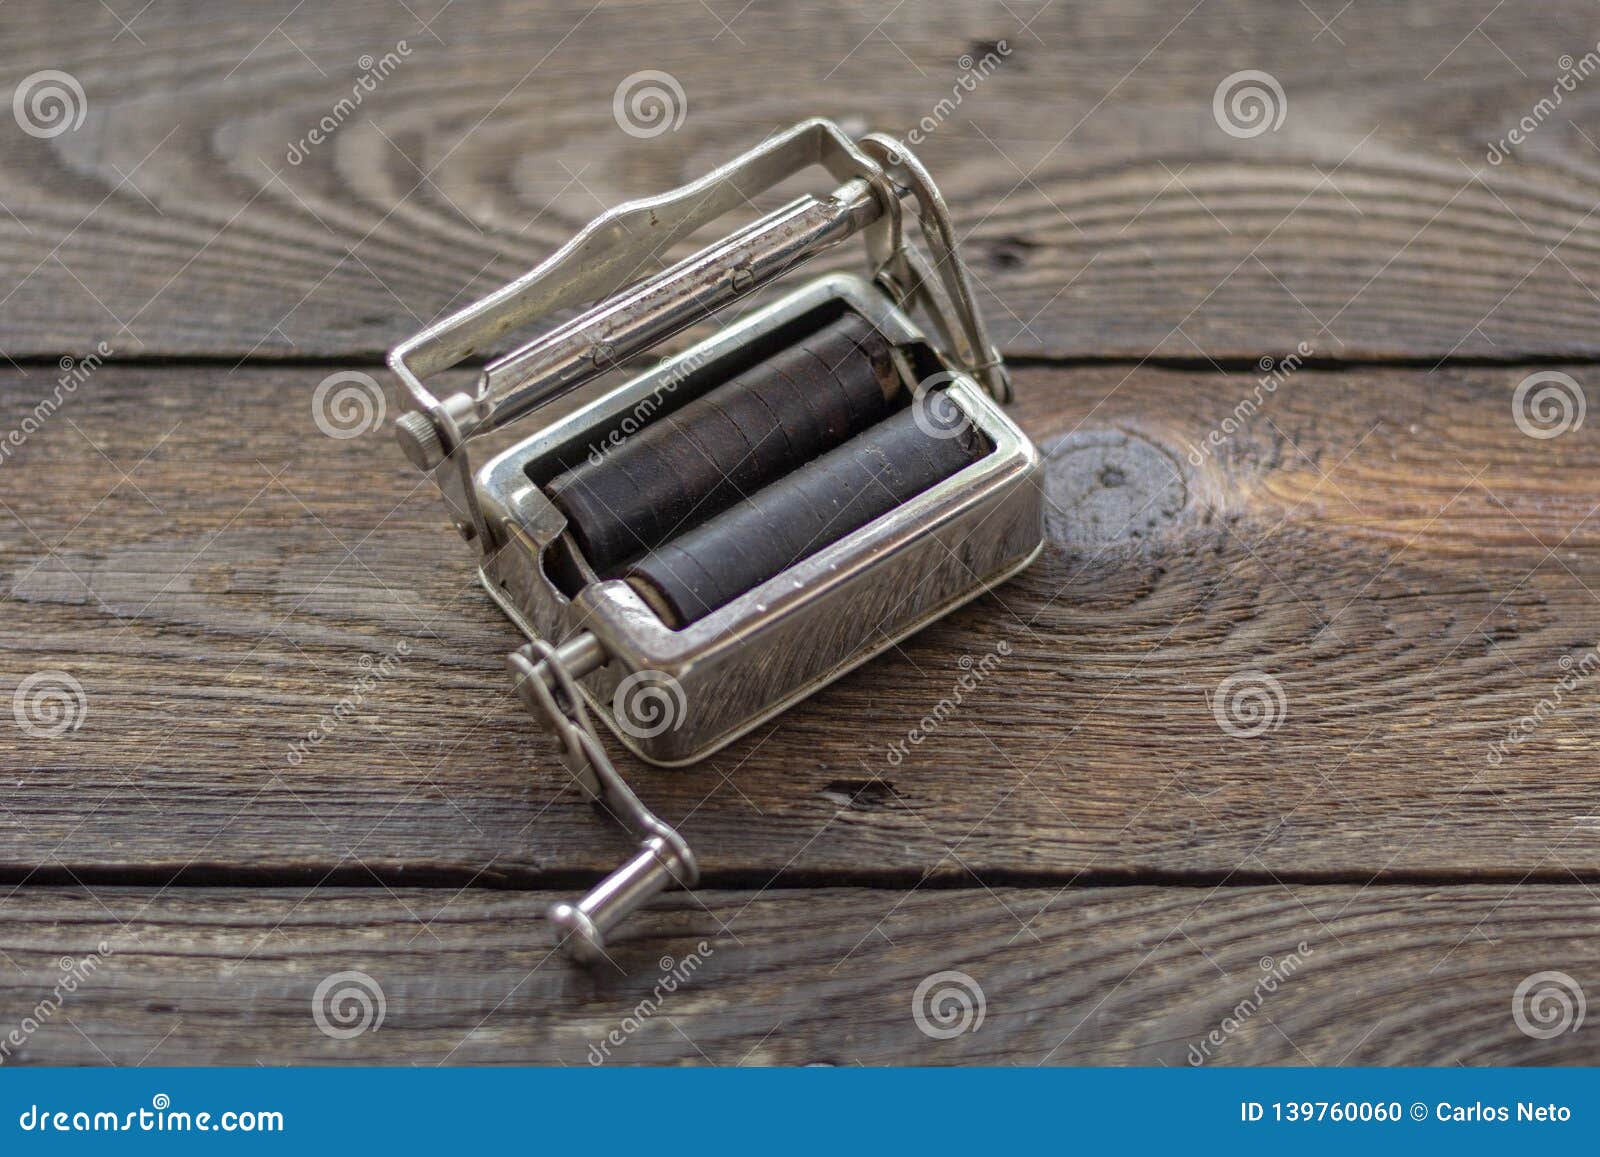 Close Up Shot of a Antique Vintage Double Edged Razor Sharpener, Retro  Concept Stock Photo - Image of grooming, barber: 139760060